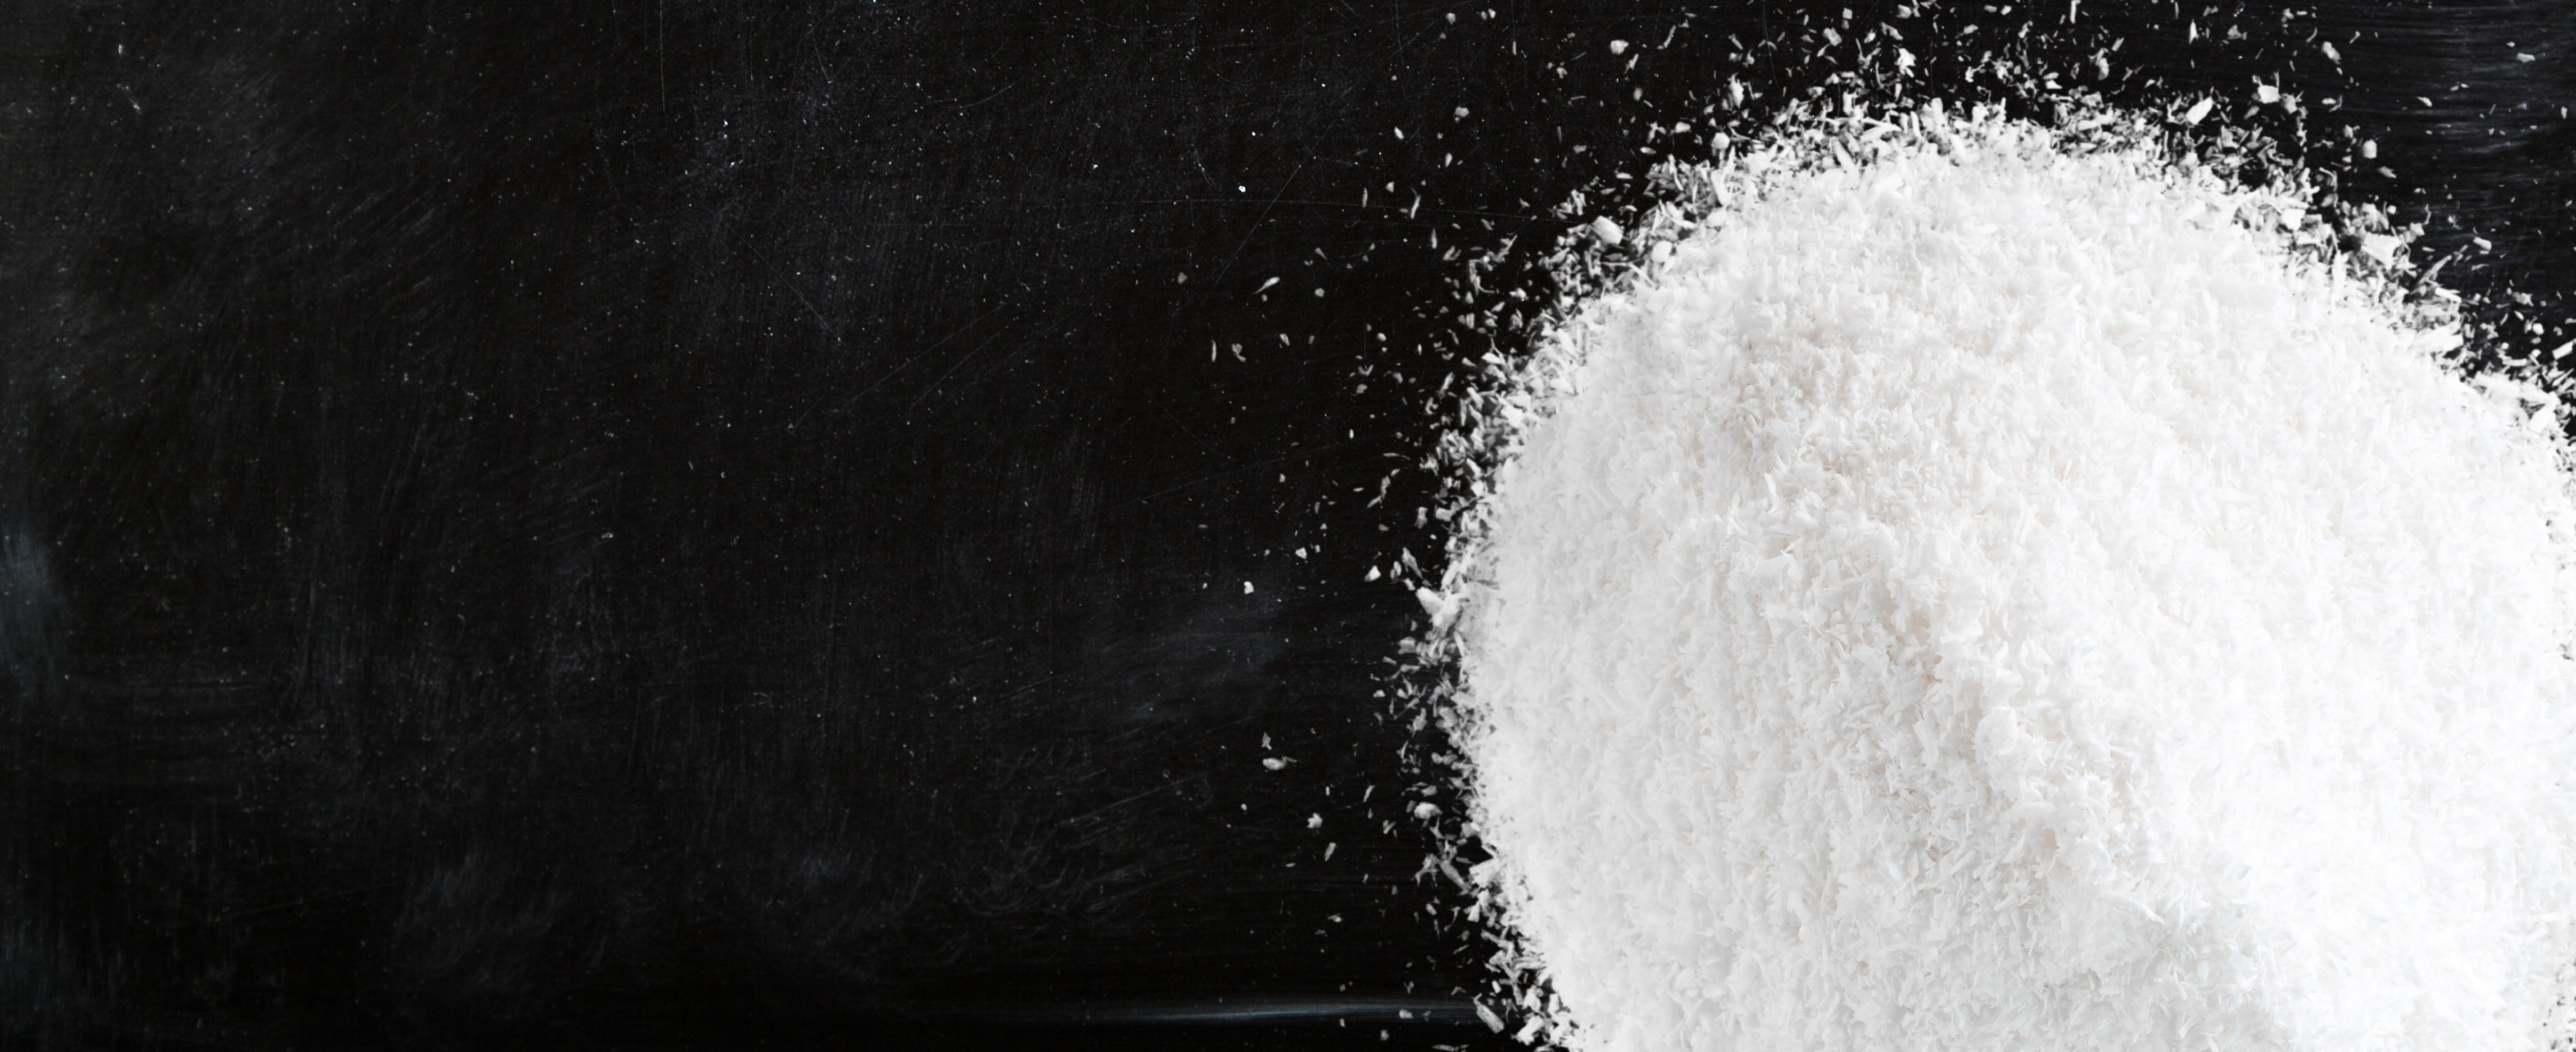 Titanium Dioxide – What the EU Ban Means For You - EAS Consulting Group